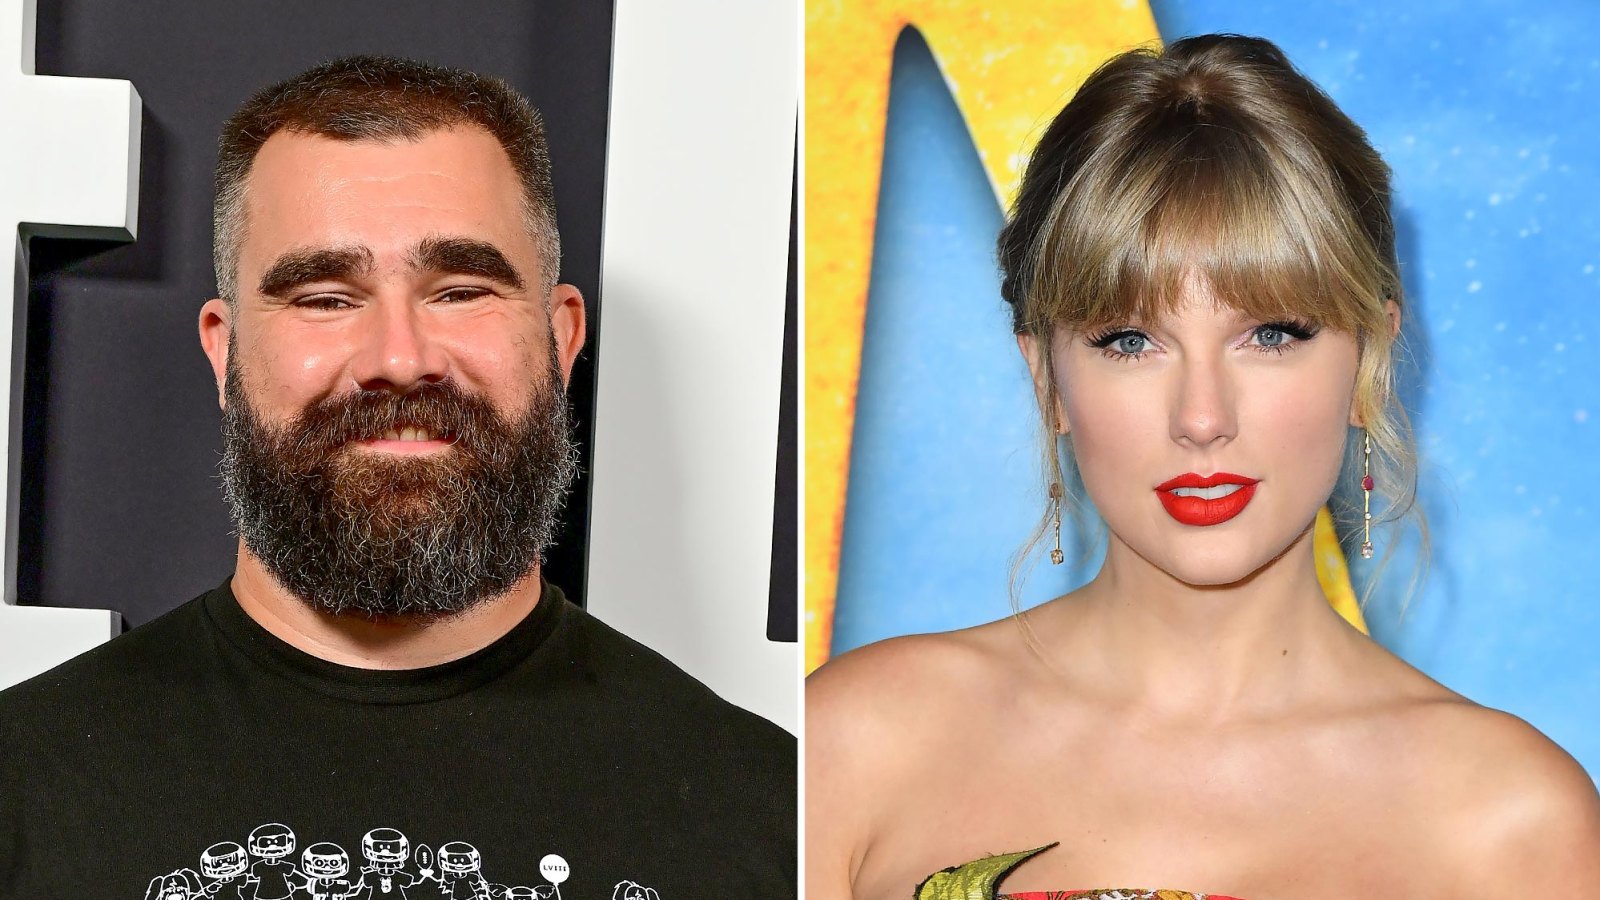 Jason Kelce Carried Young Fan to Meet Taylor Swift in Their Suite